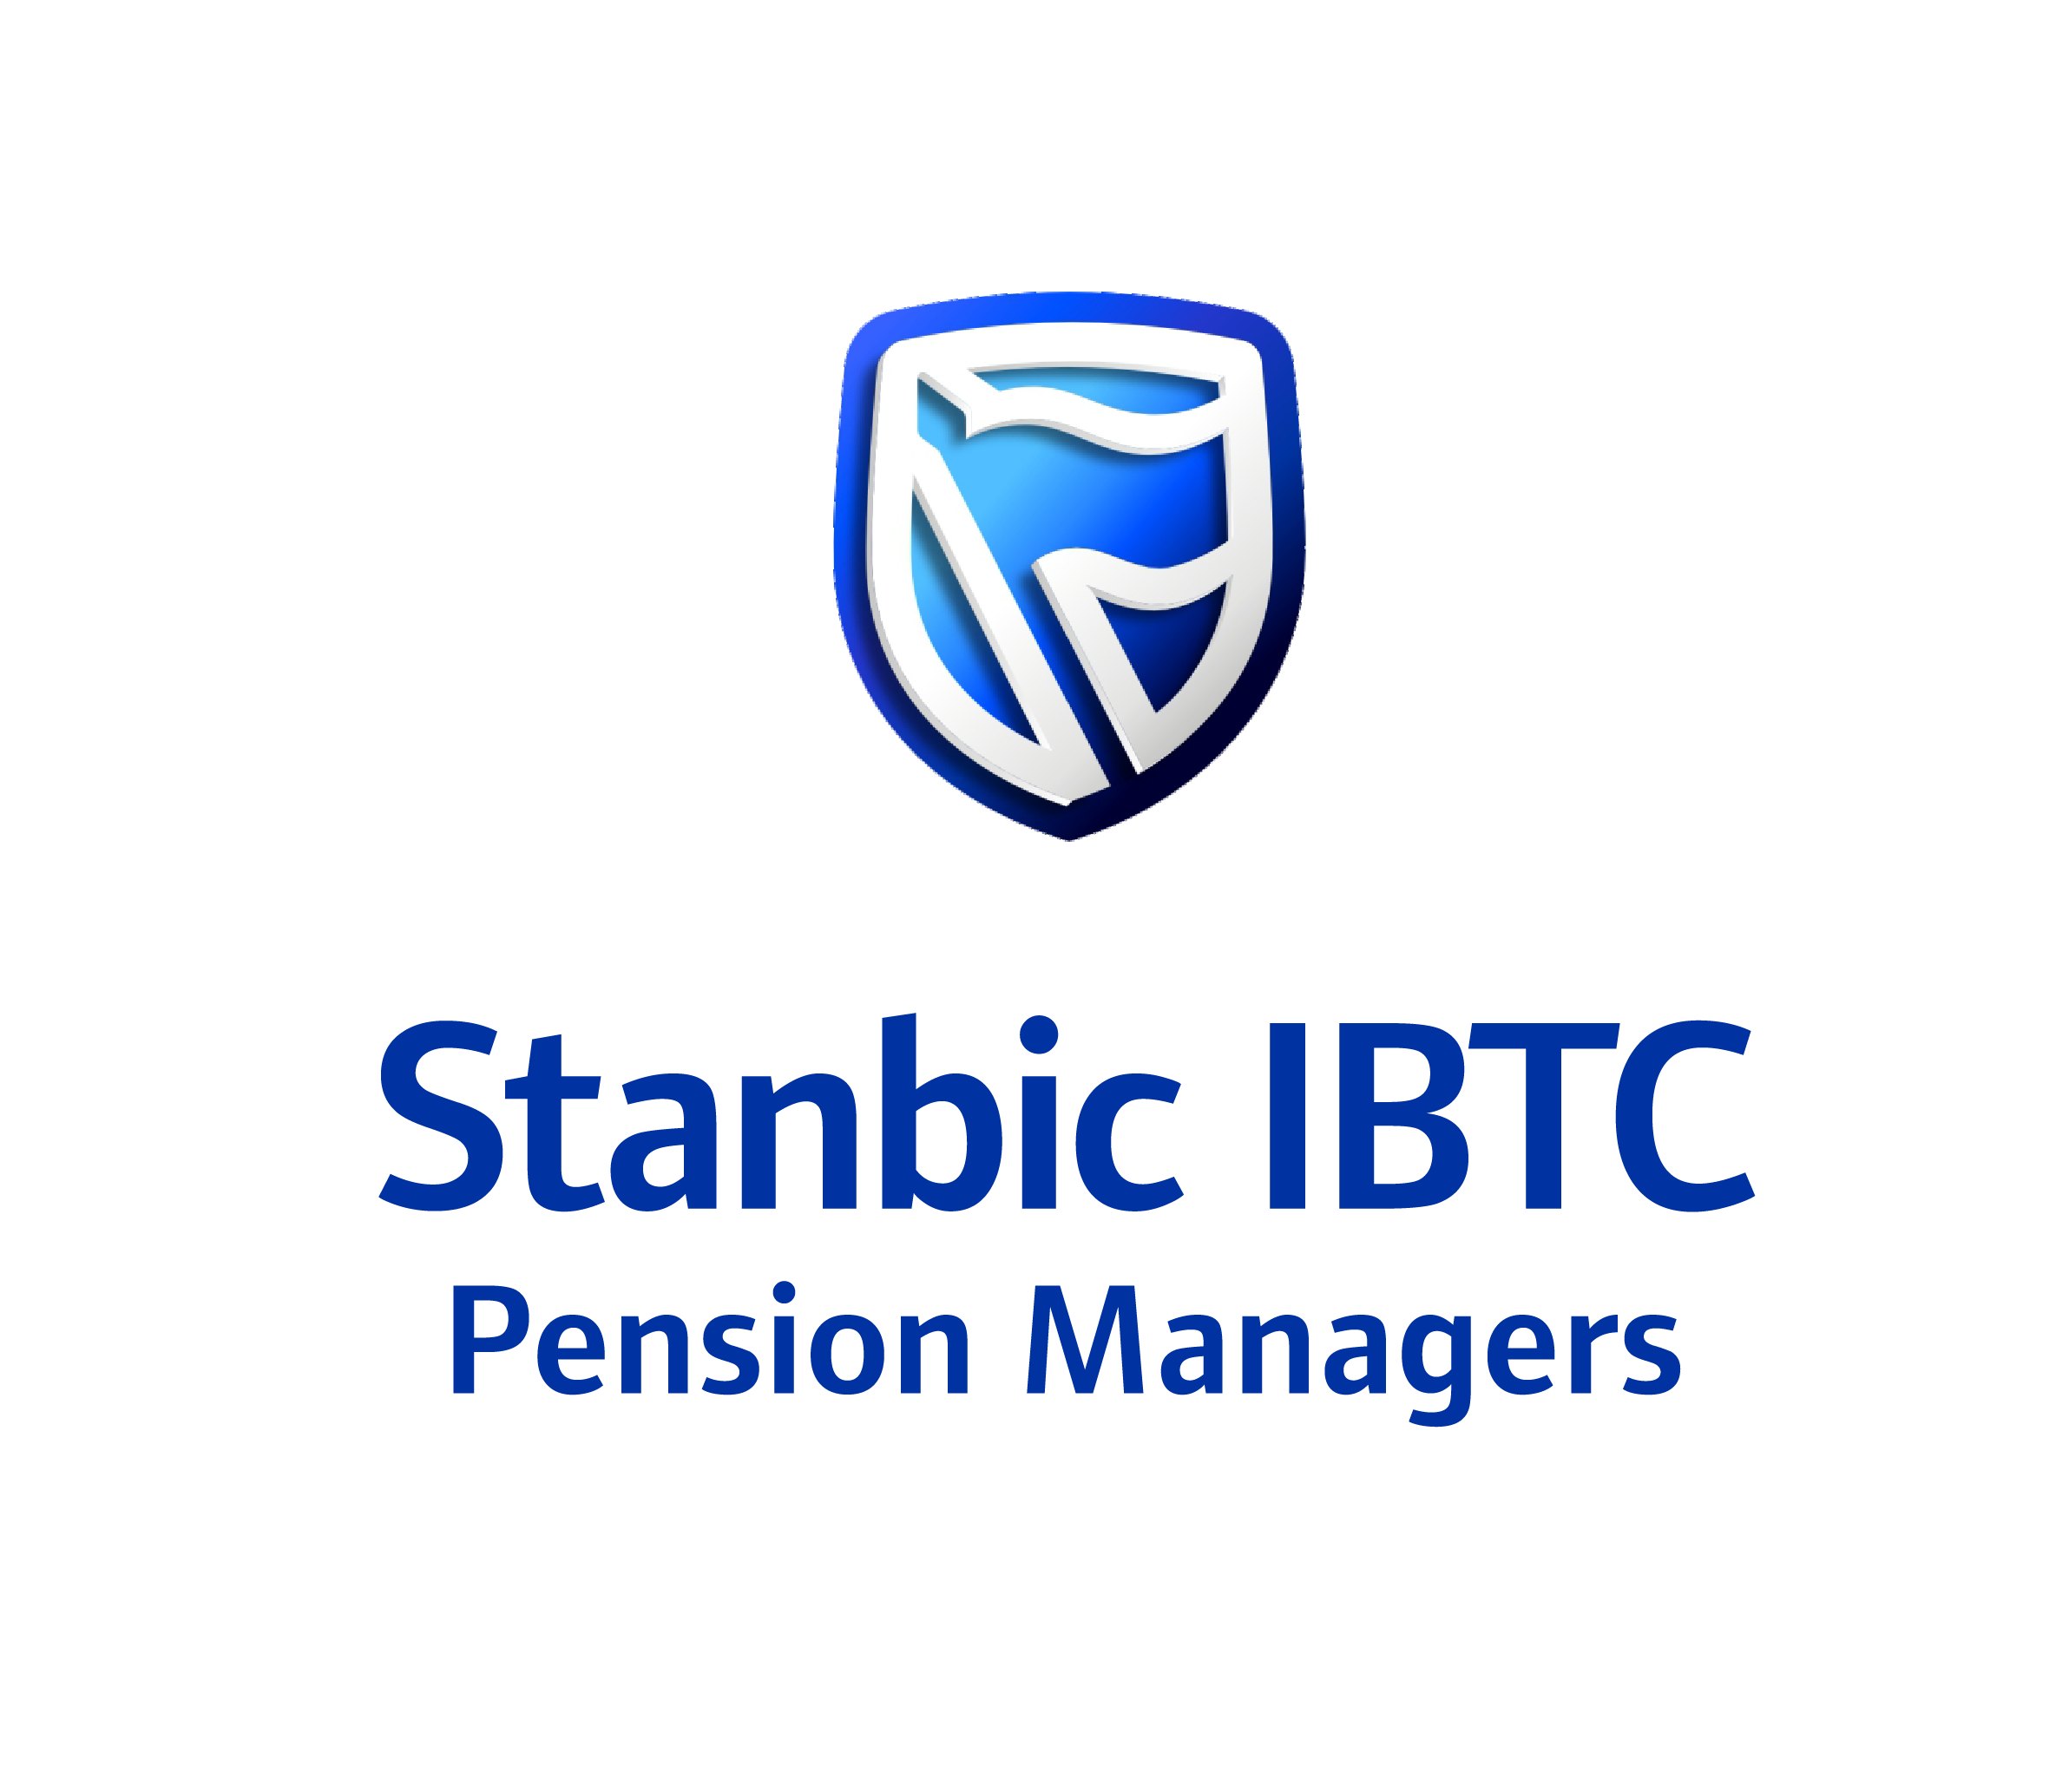 Stanbic IBTC pensiom Managers